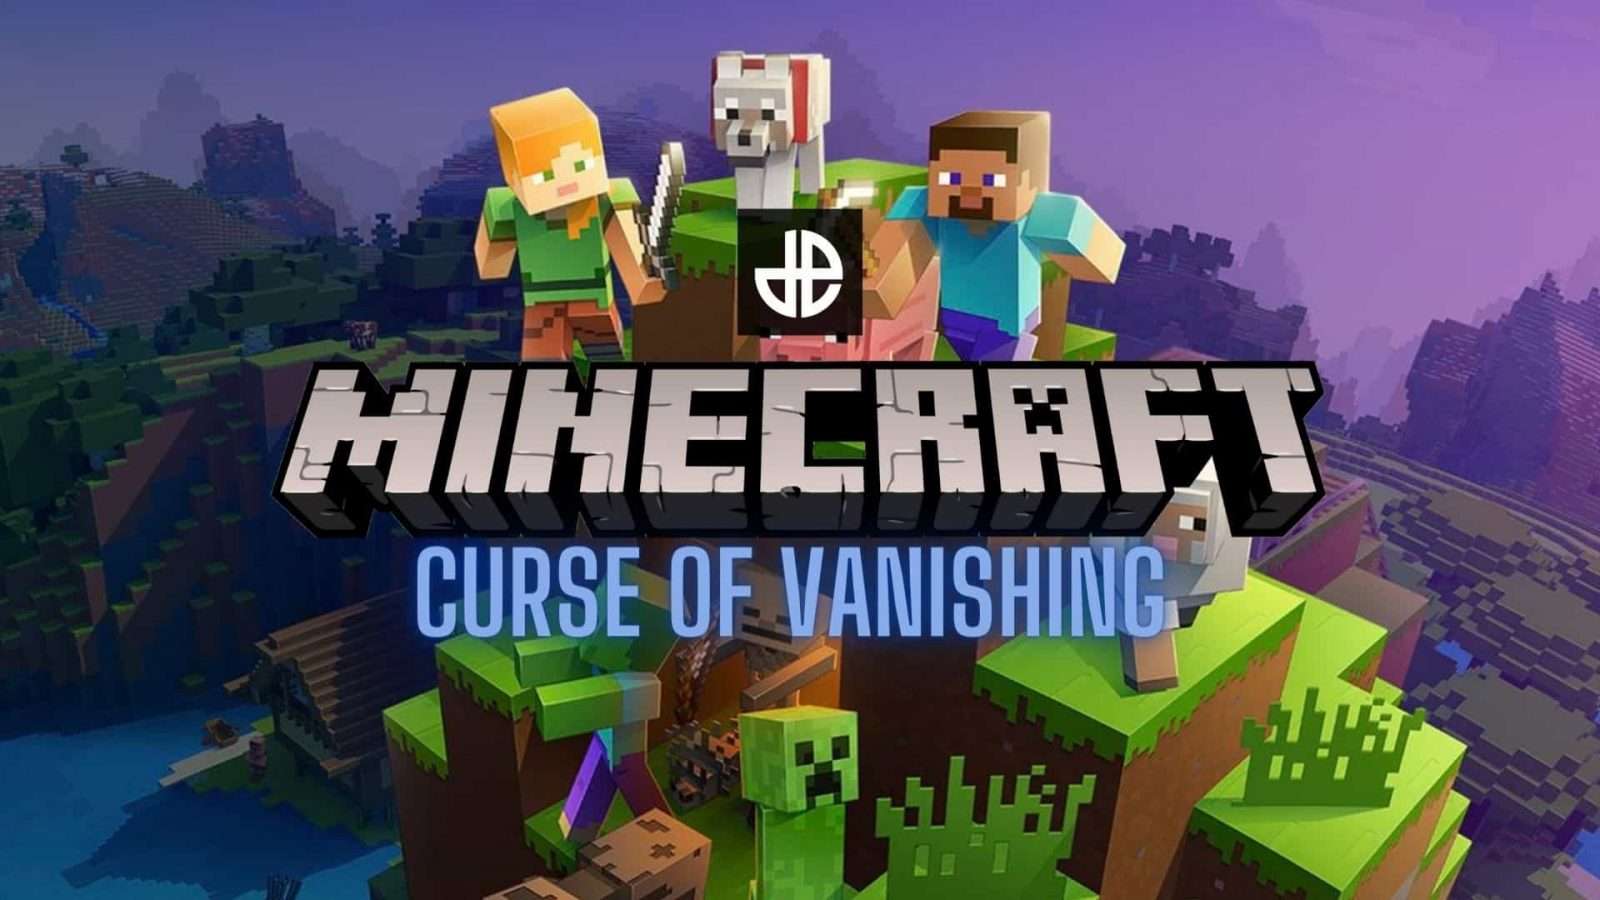 Minecraft artwork and logo with the words 'Curse of Vanishing'